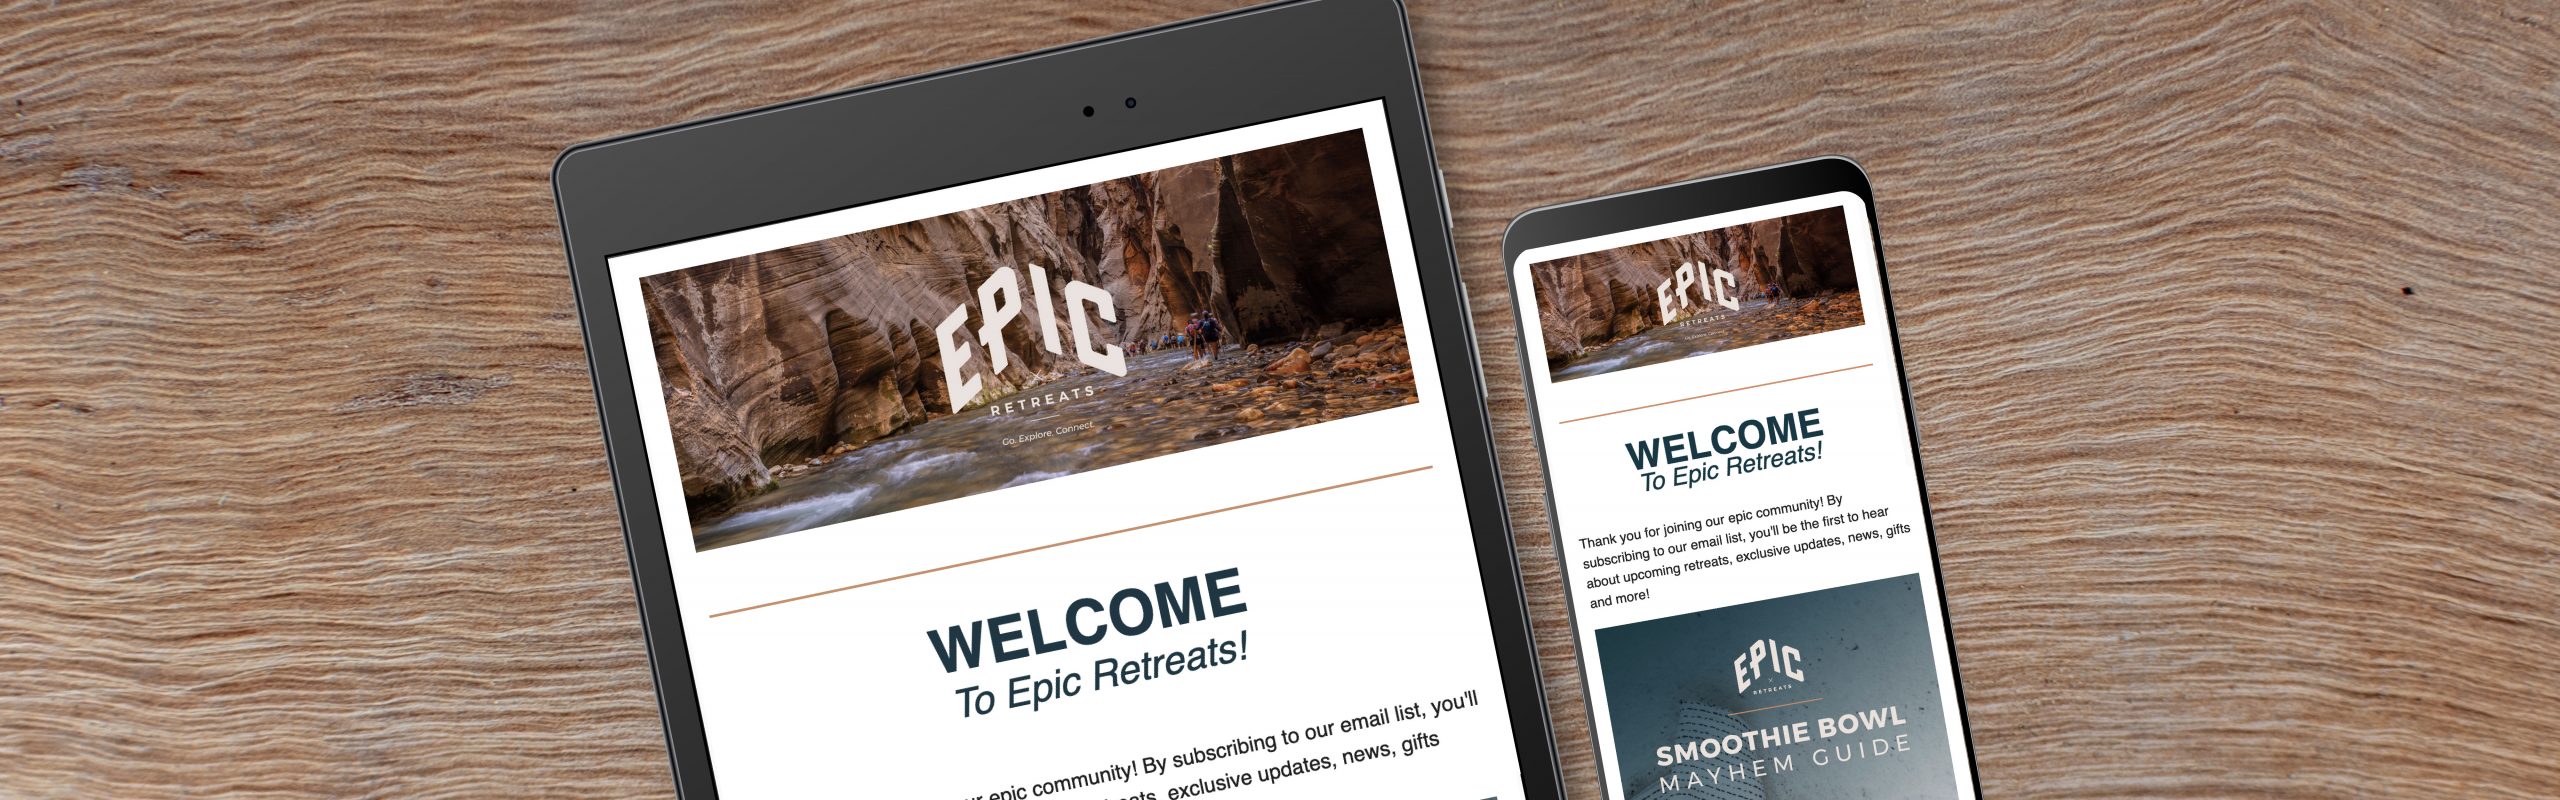 A laptop and a smartphone resting on a wooden surface display the homepage of Epic Retreats, featuring a welcome message.